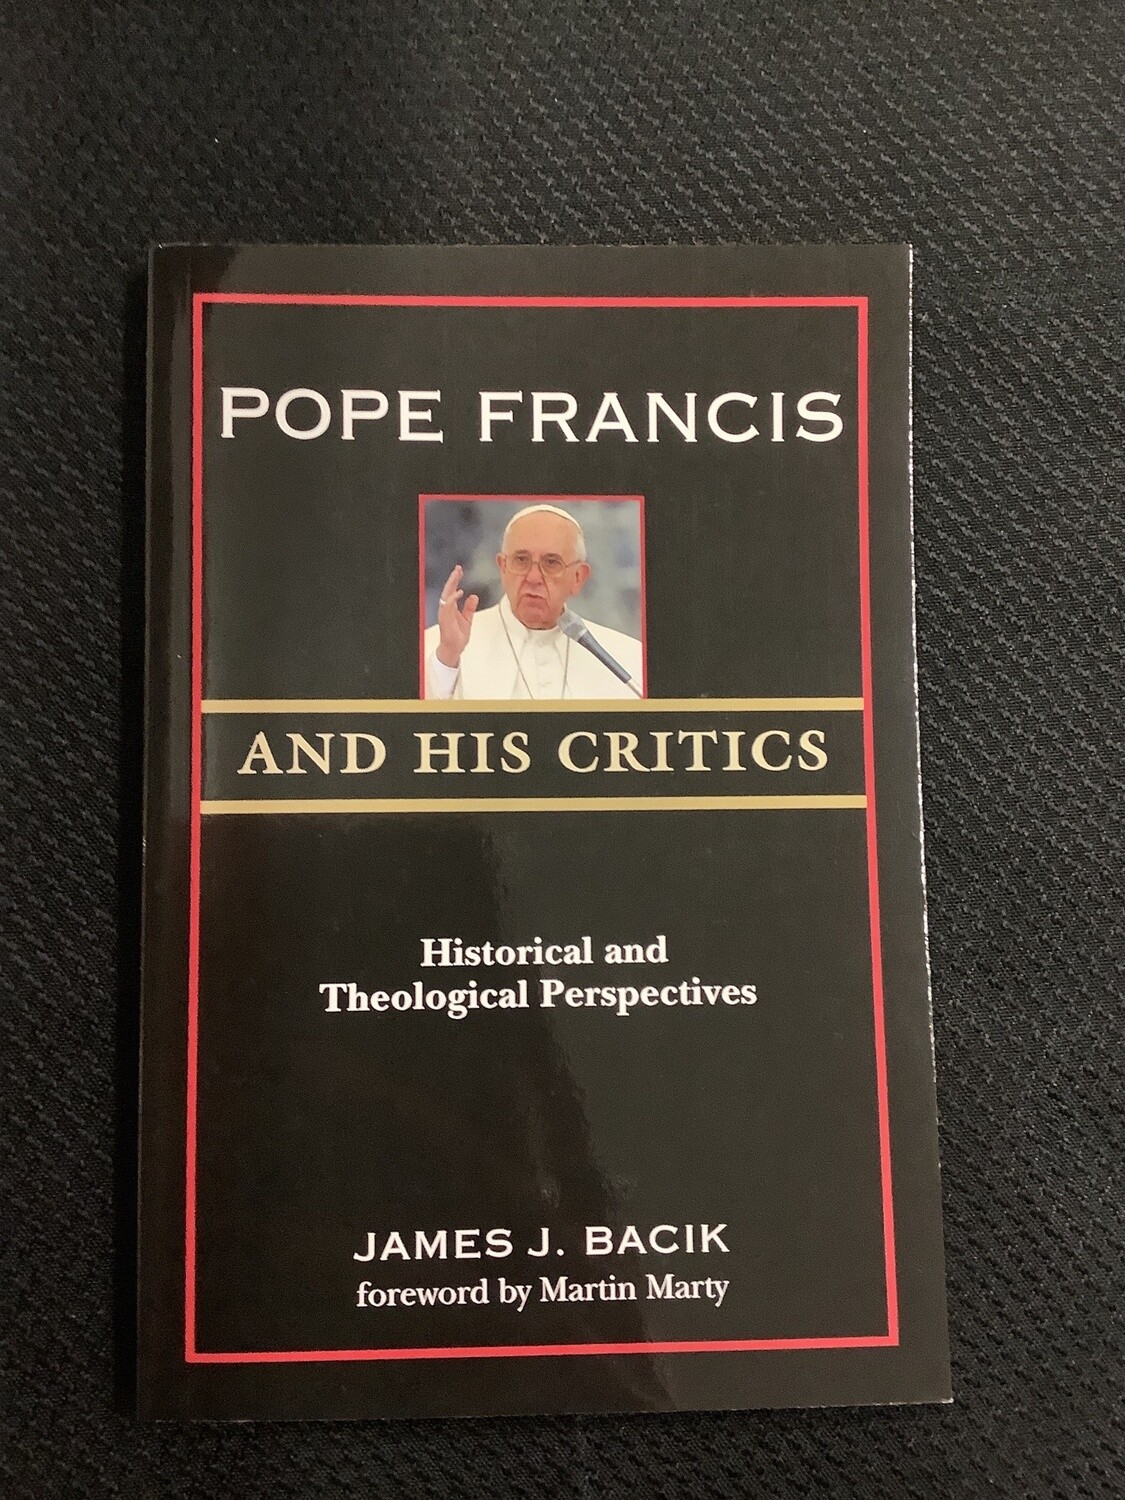 Pope Francis And His Critics Historical and Theological Perspectives - James J. Bacik